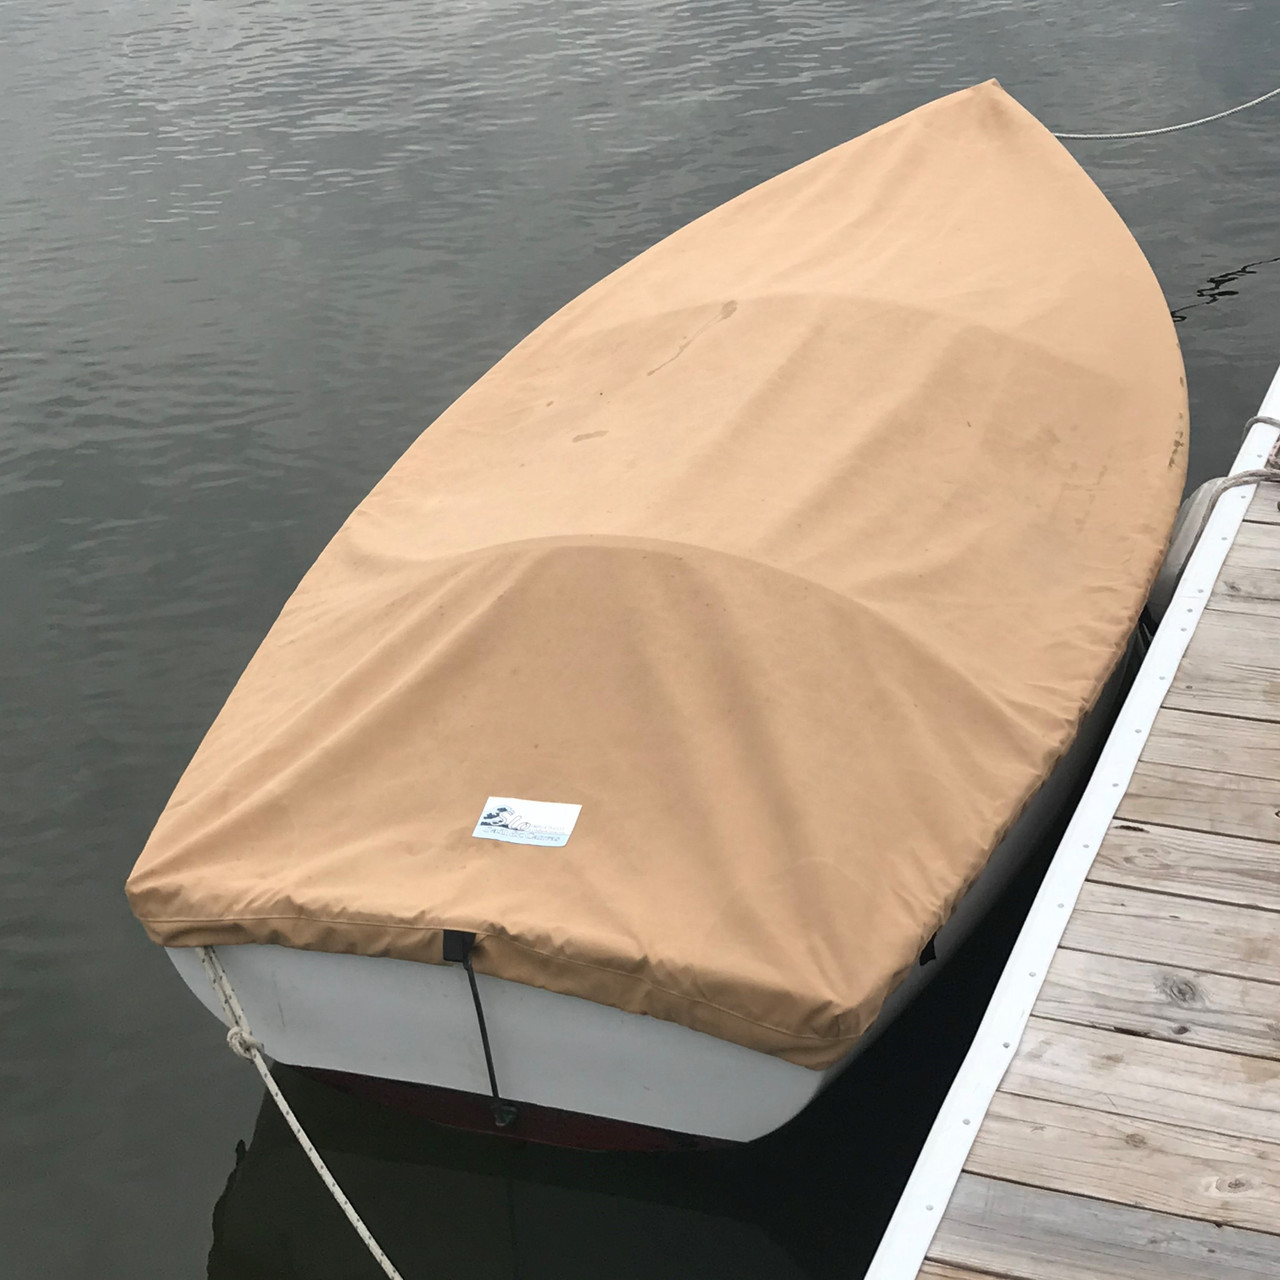 Protect your Dyer Dink from the Sun and nesting Ducks with a Top Cover available in many different fabric and colors. Pictured: Sunbrella Toast